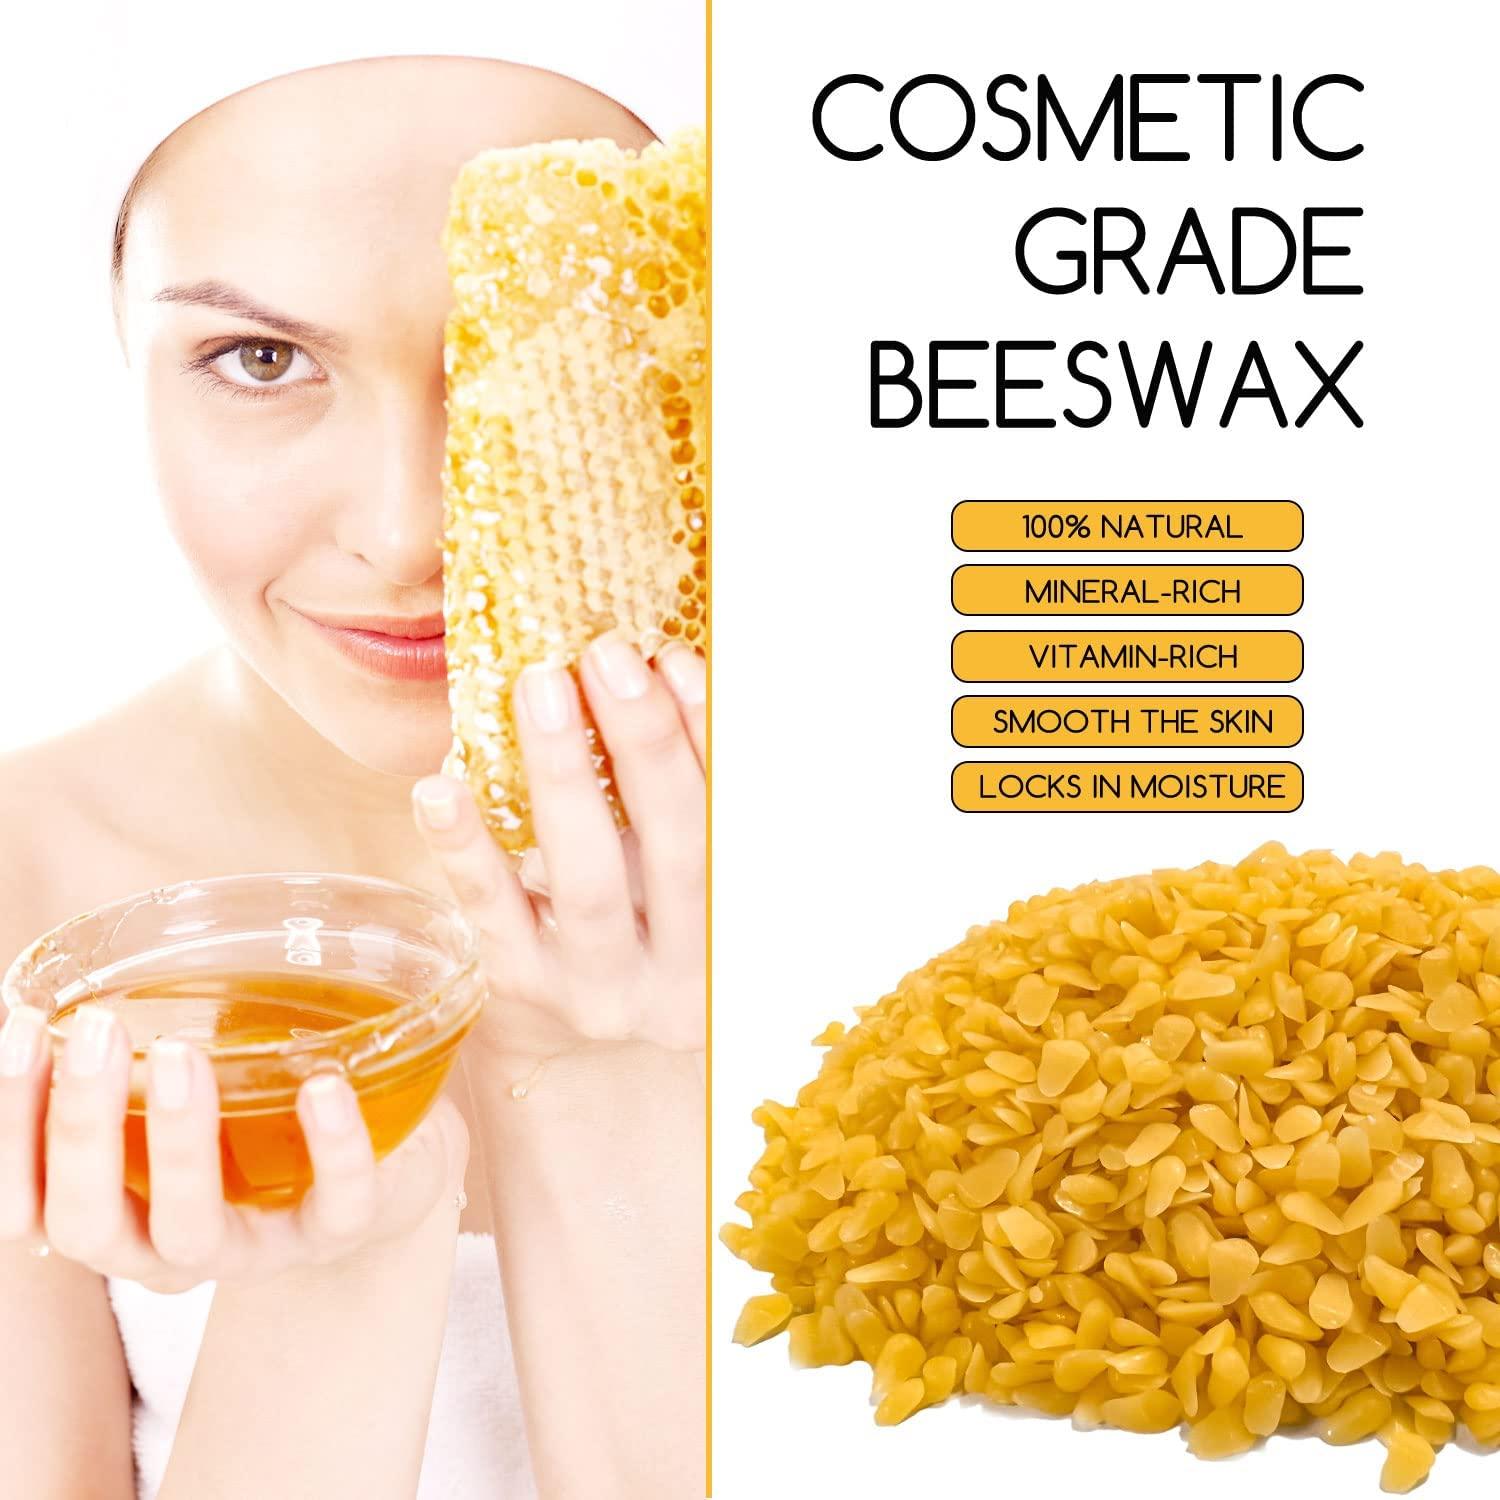 Soapeauty Yellow Beewax Natural Bees Wax Pastilles For Lip Balm, Skin Care  Beeswax Pellets Used as Candle Making Supplies for Beeswax Candles (2 LBS)